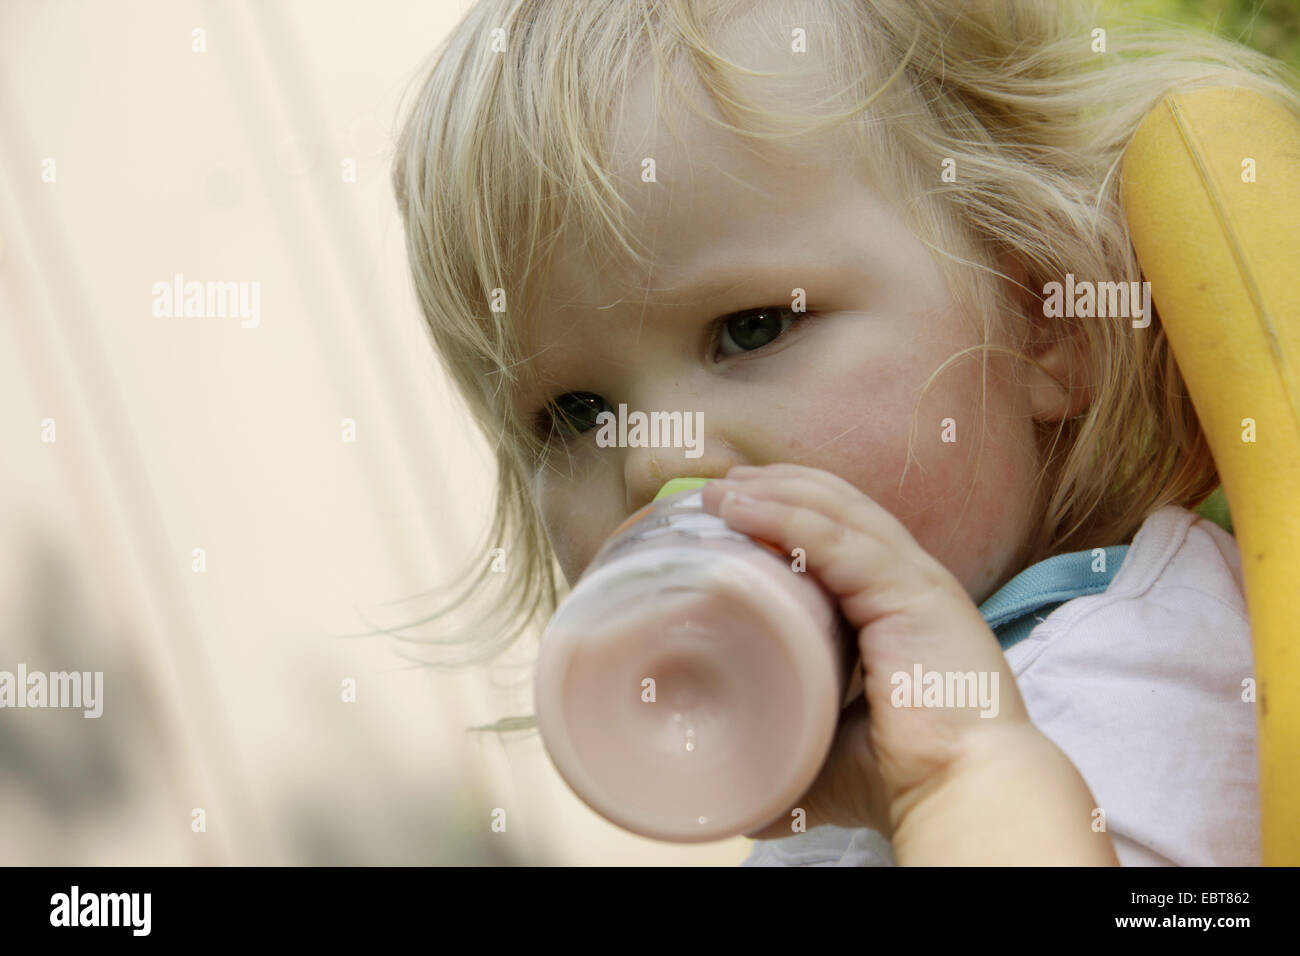 little girl with dirty face sucking at a baby bottle, Germany Stock Photo